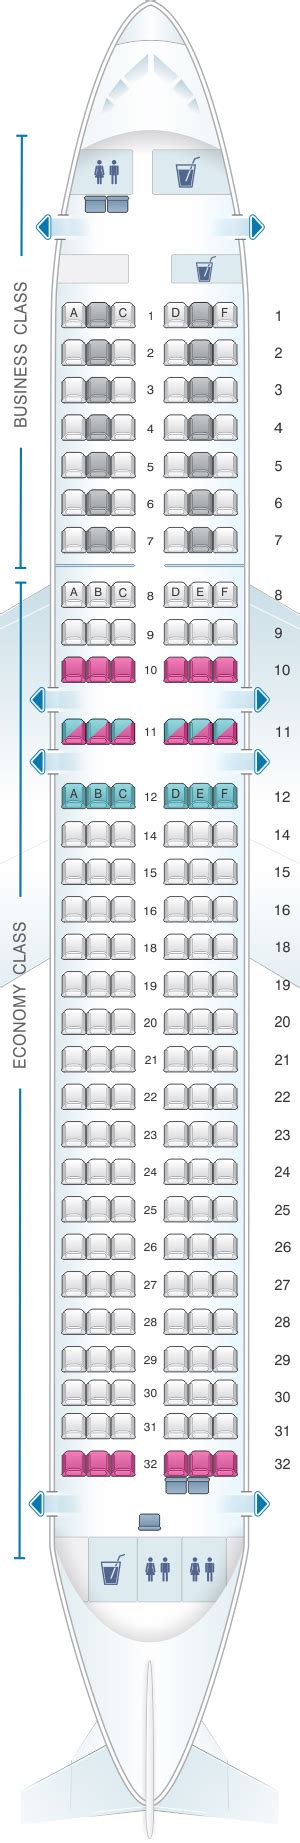 Lufthansa Seat Map A320 Awesome Home